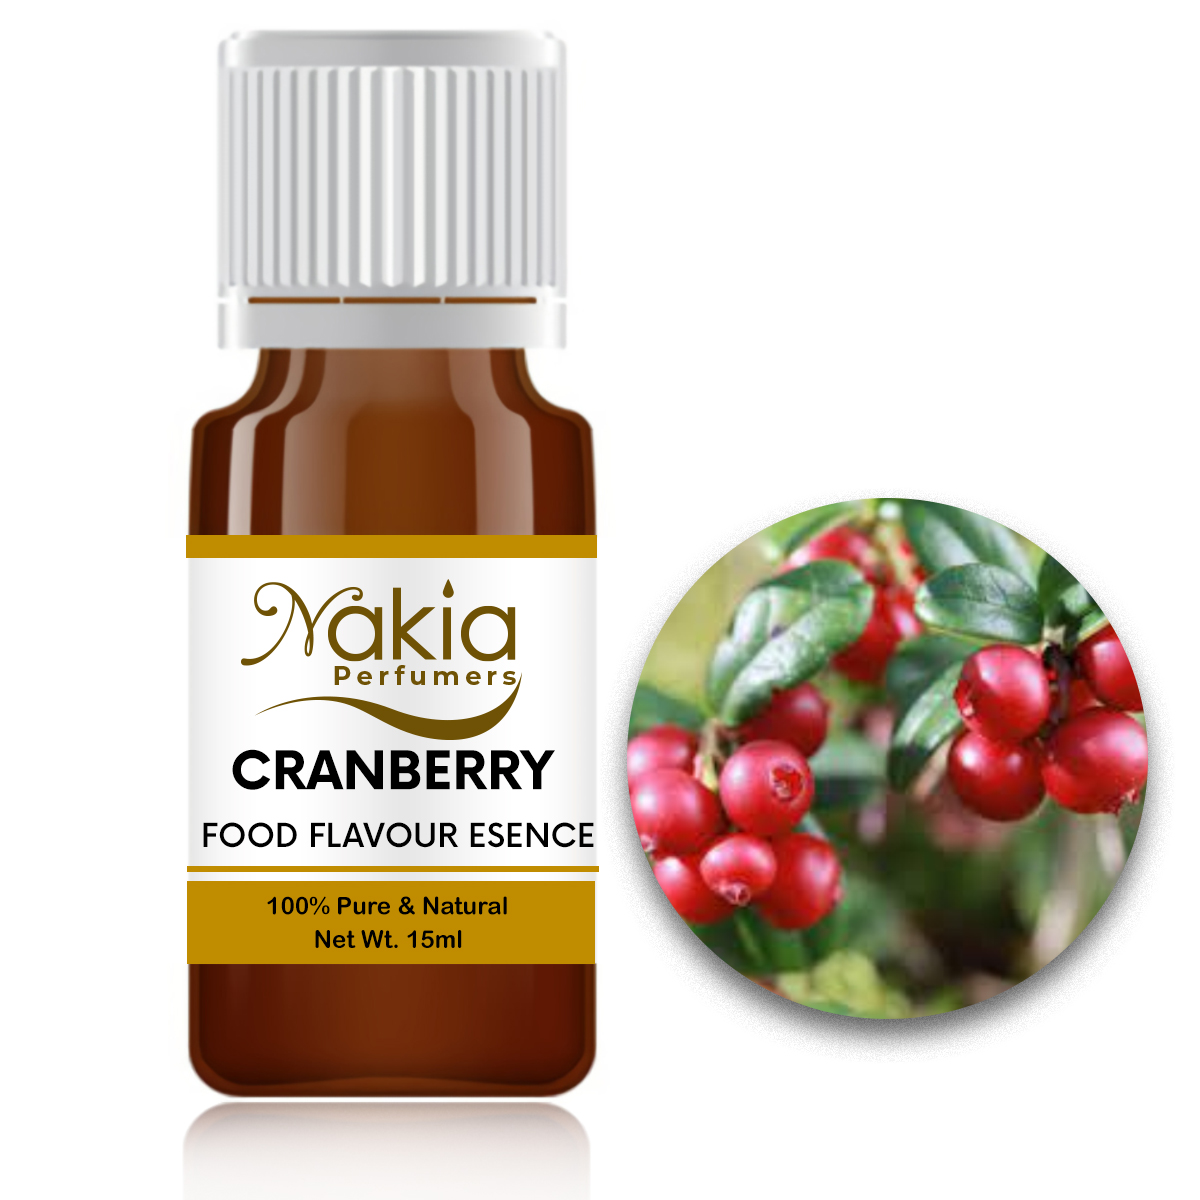 CRANBERRY FLAVOURING ESSENCE